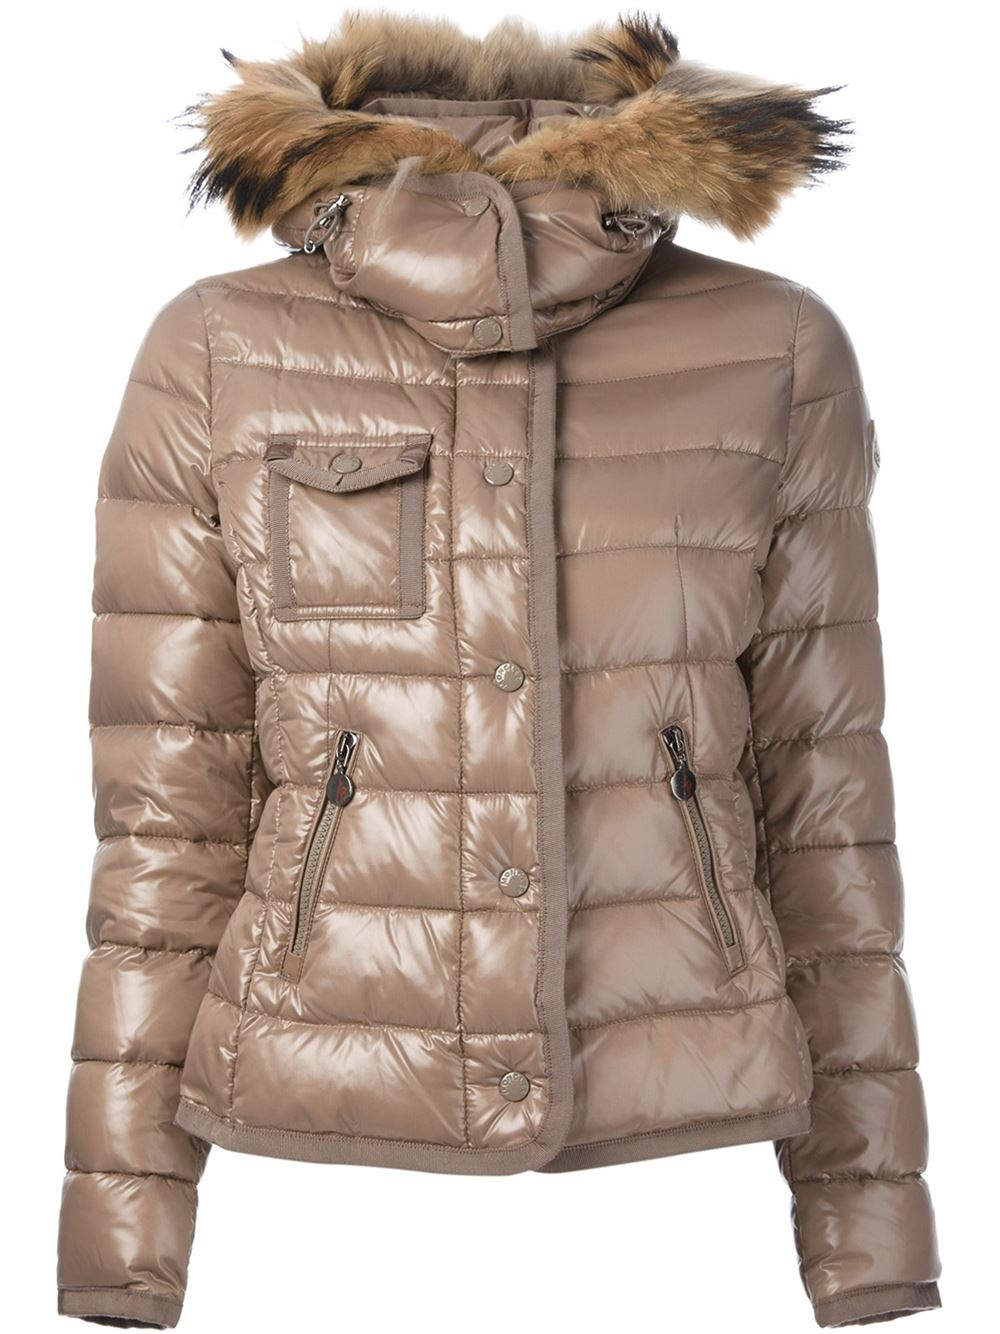 Lyst - Moncler Armoise Jacket in Brown